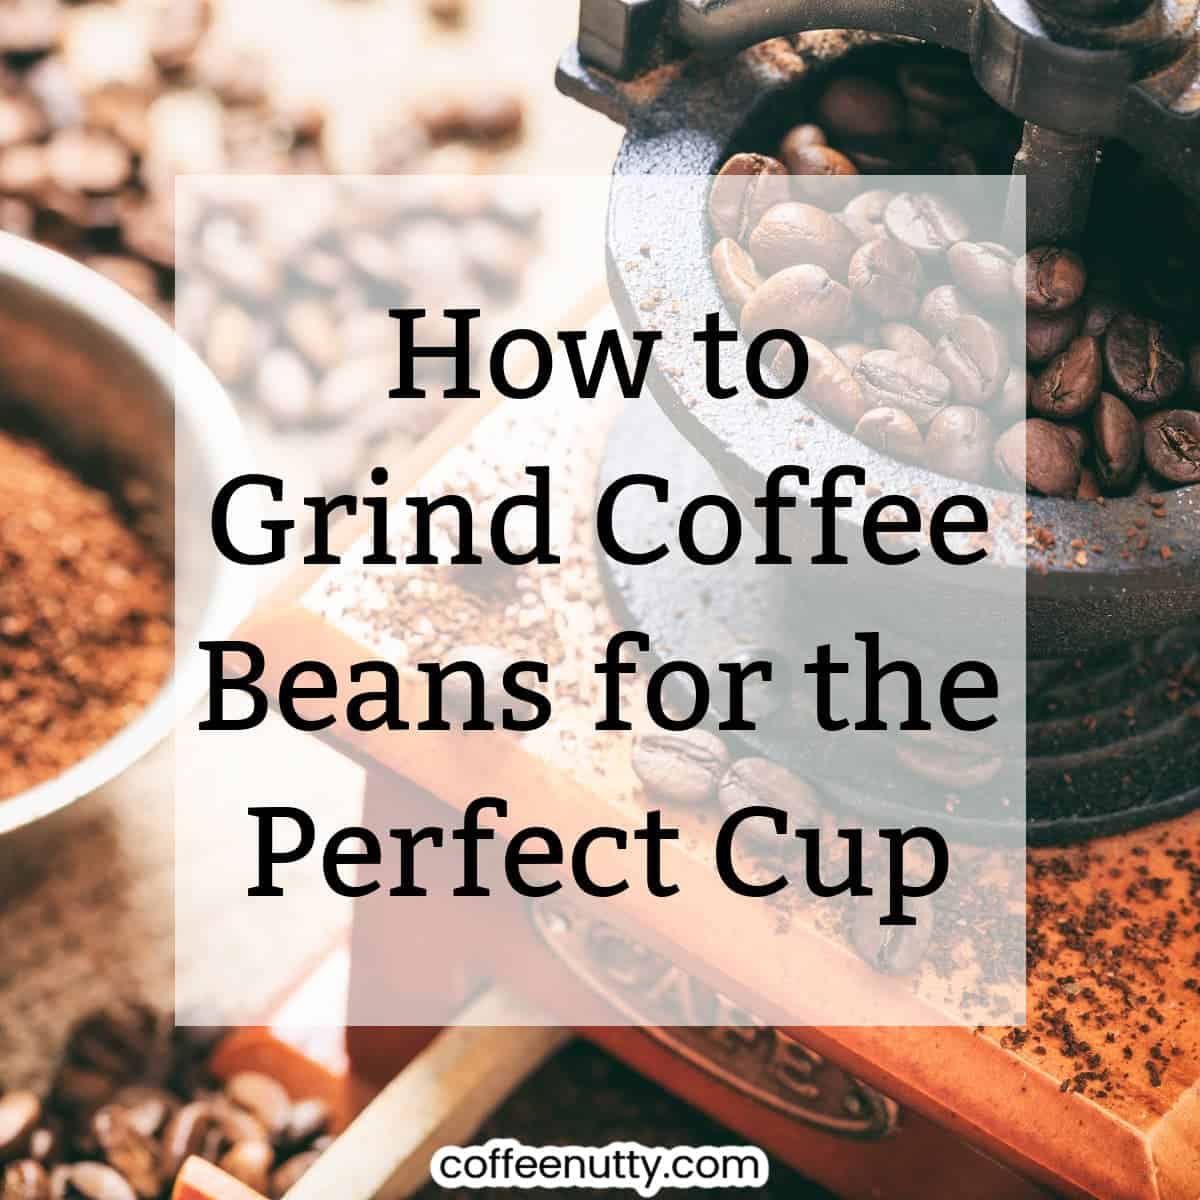 Image in background of coffee grinder and fresh grounds with text over stating "how to grind coffee beans for the perfect cup".